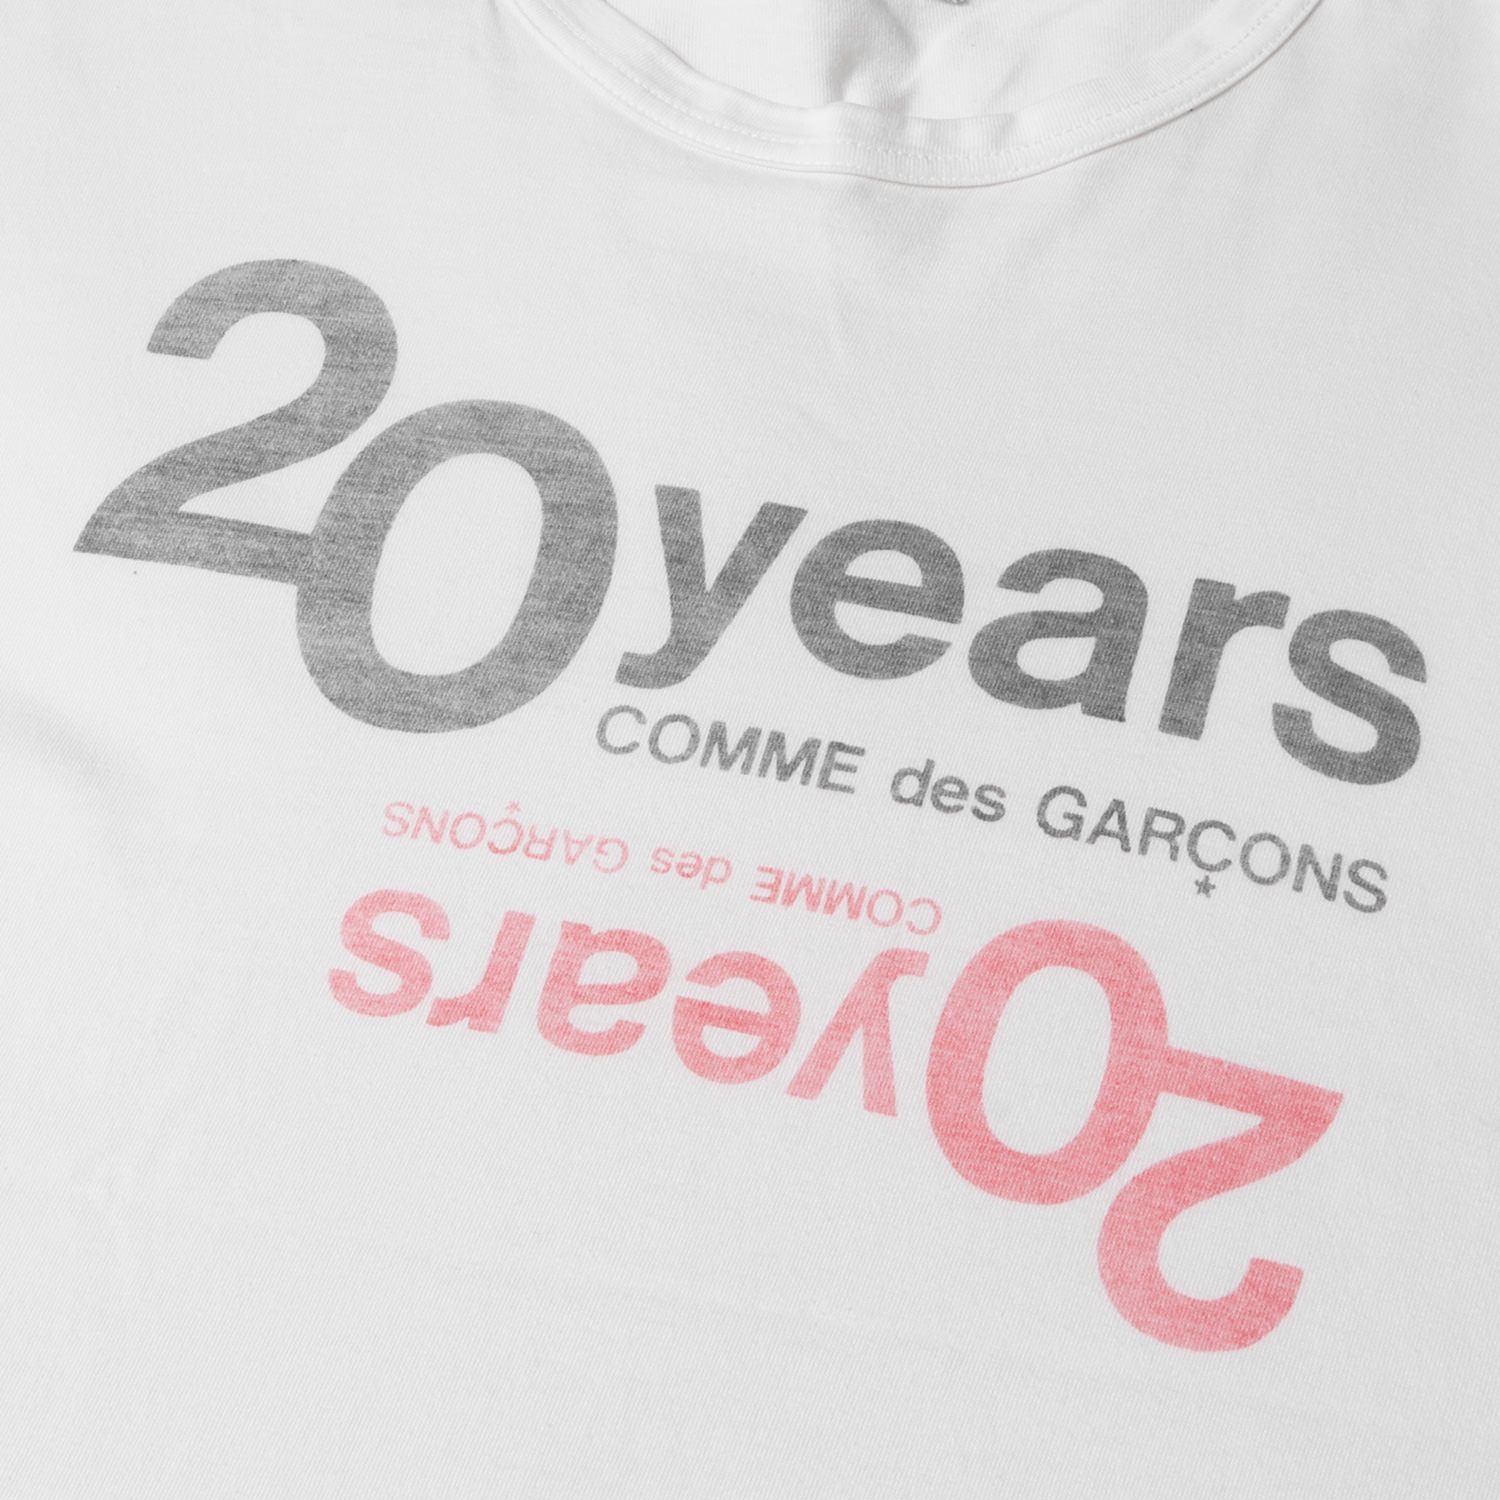 COMME des GARCONS コムデギャルソン Tシャツ 92SS 20years